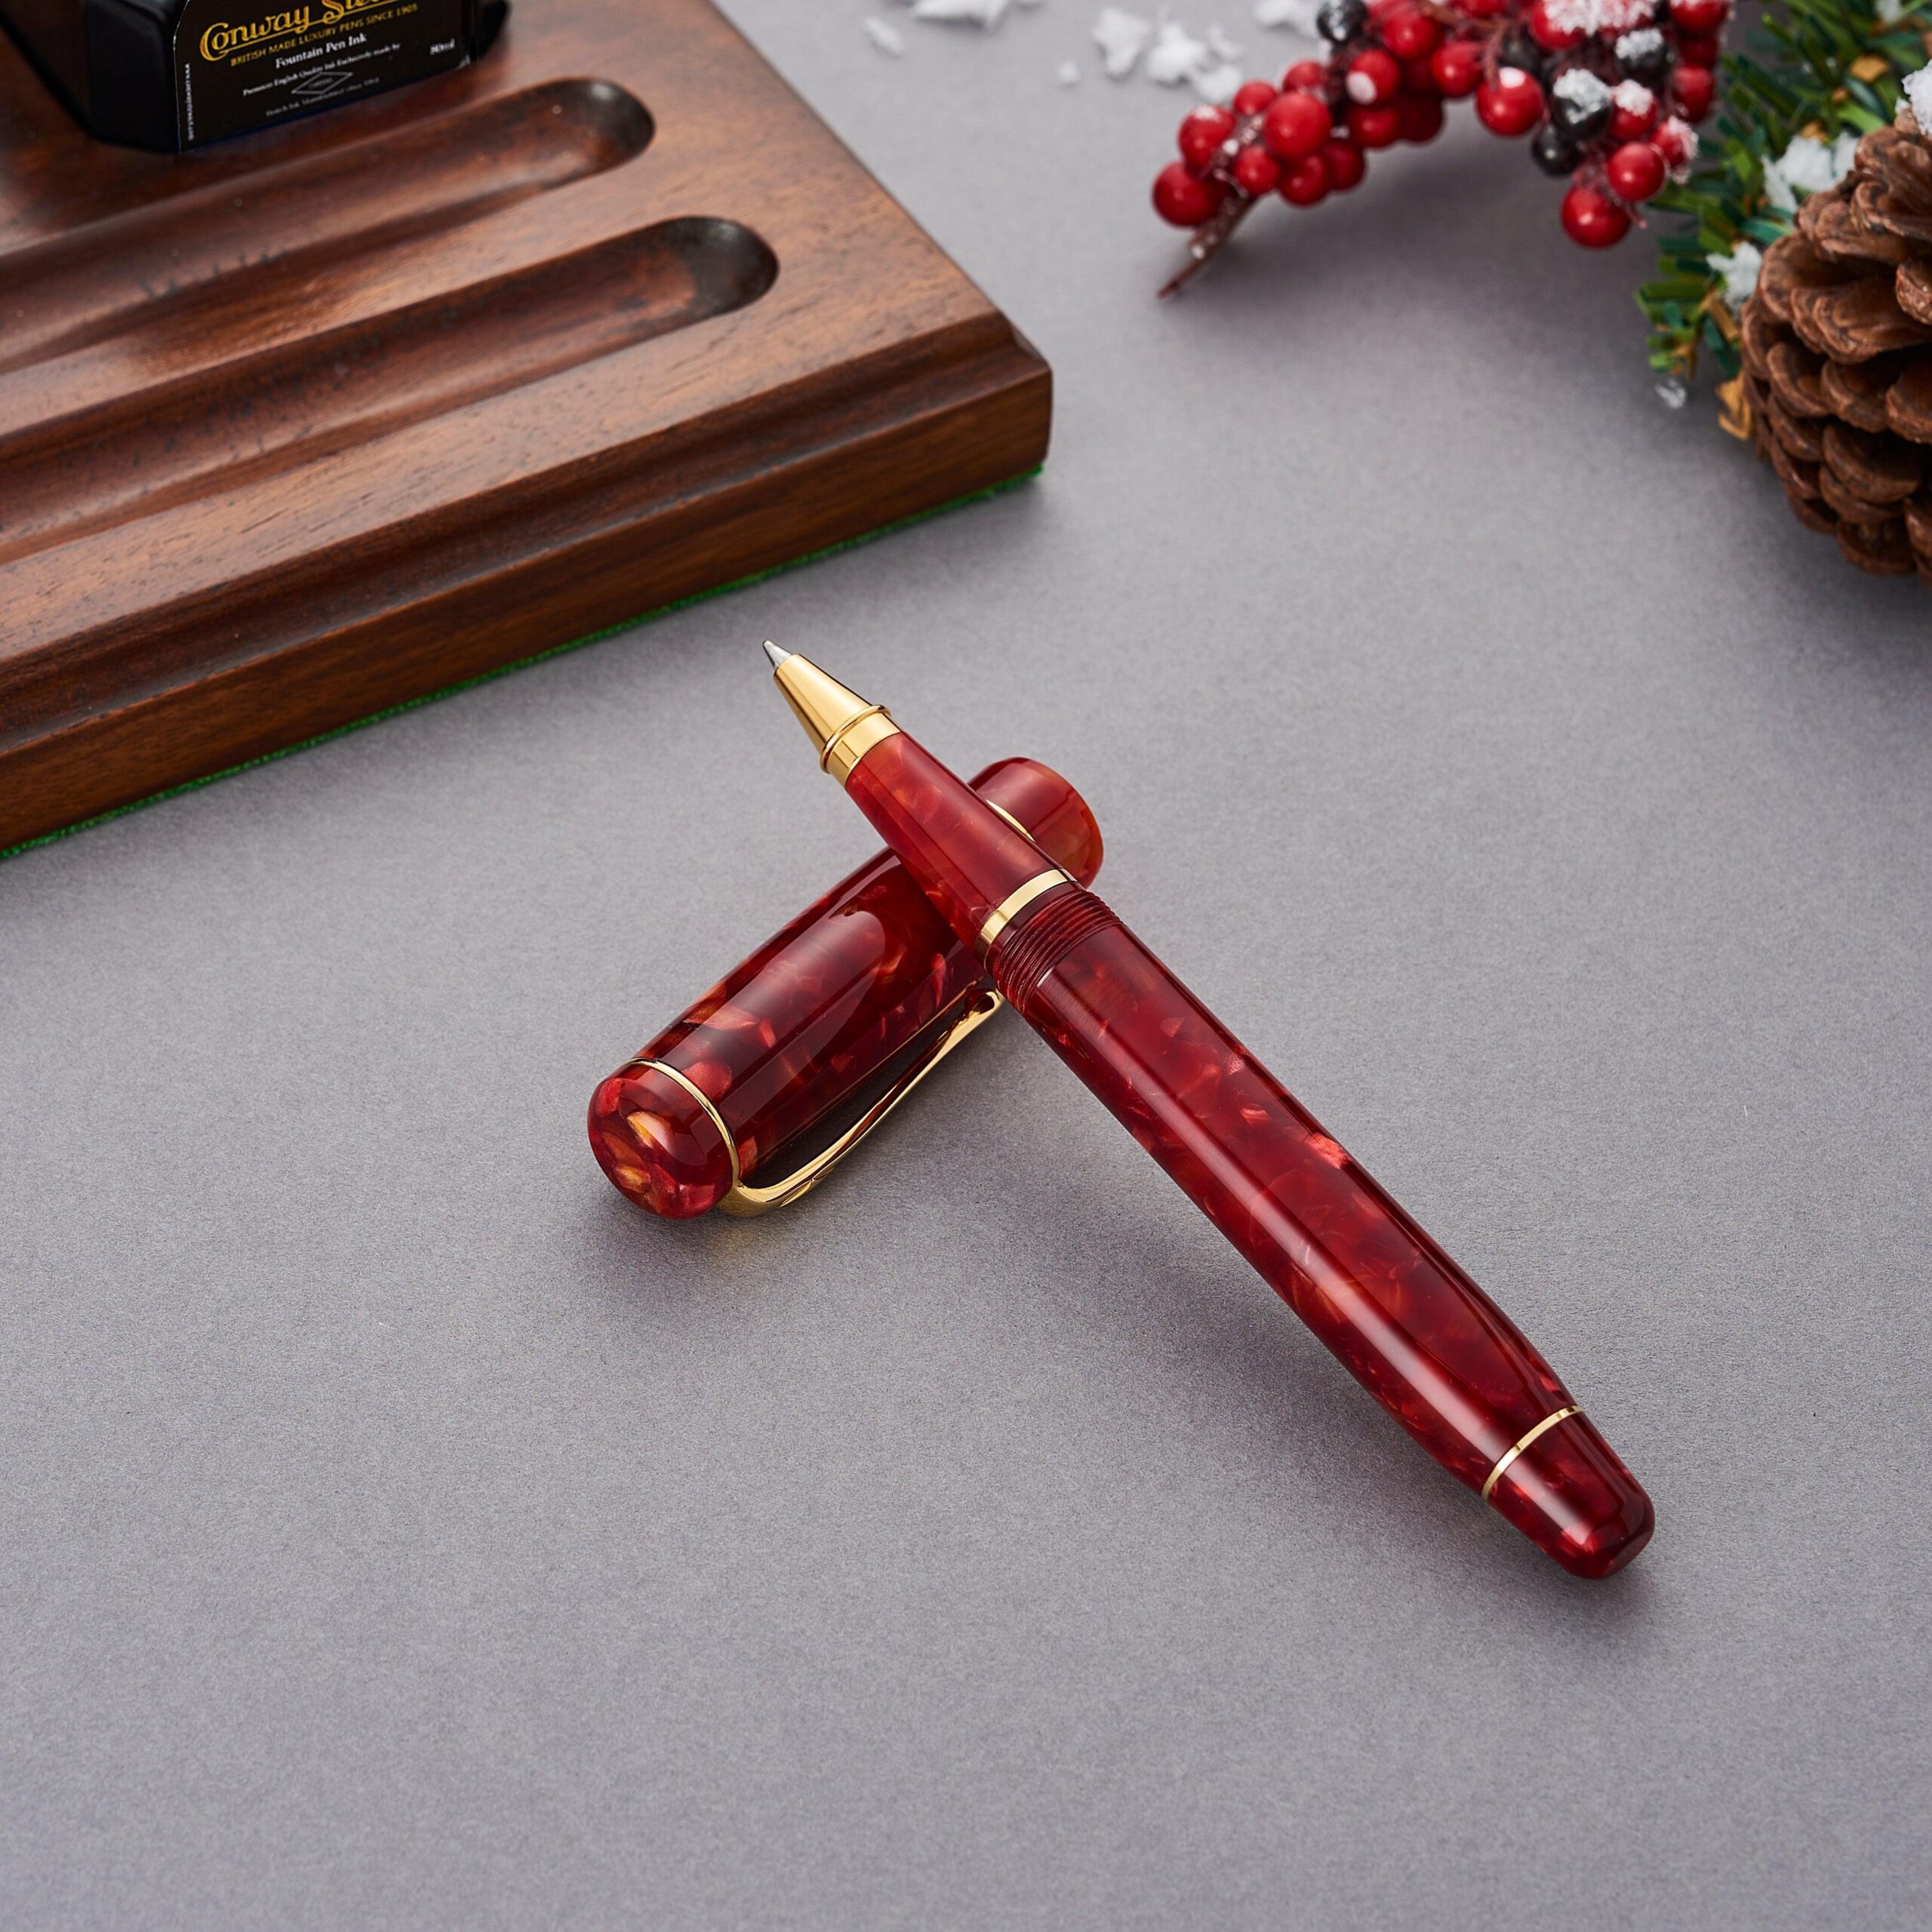 Luxury Pen Gifts: Elevating Special Occasions with Fountain Pens and Ink Bottles